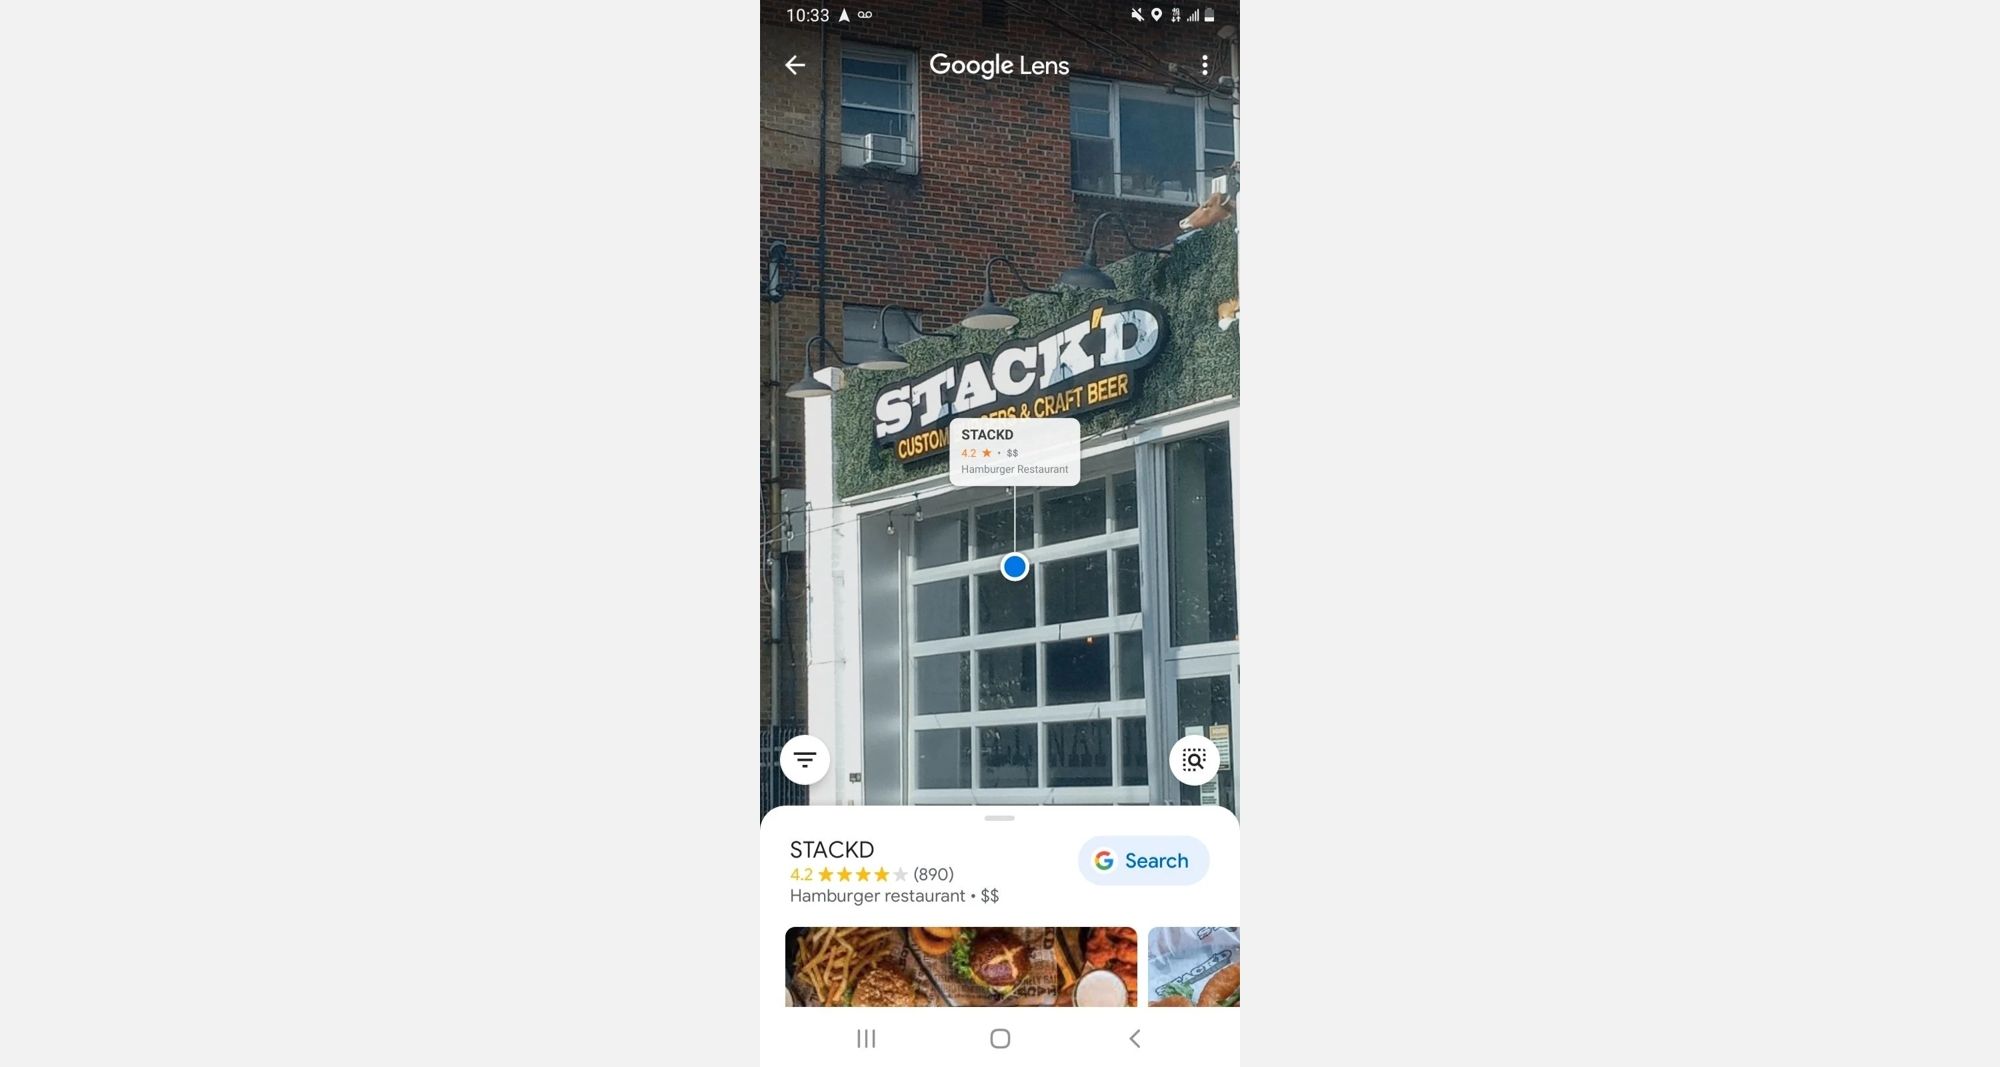 We learned how to find a restaurant on Google Lens with the Location finder.